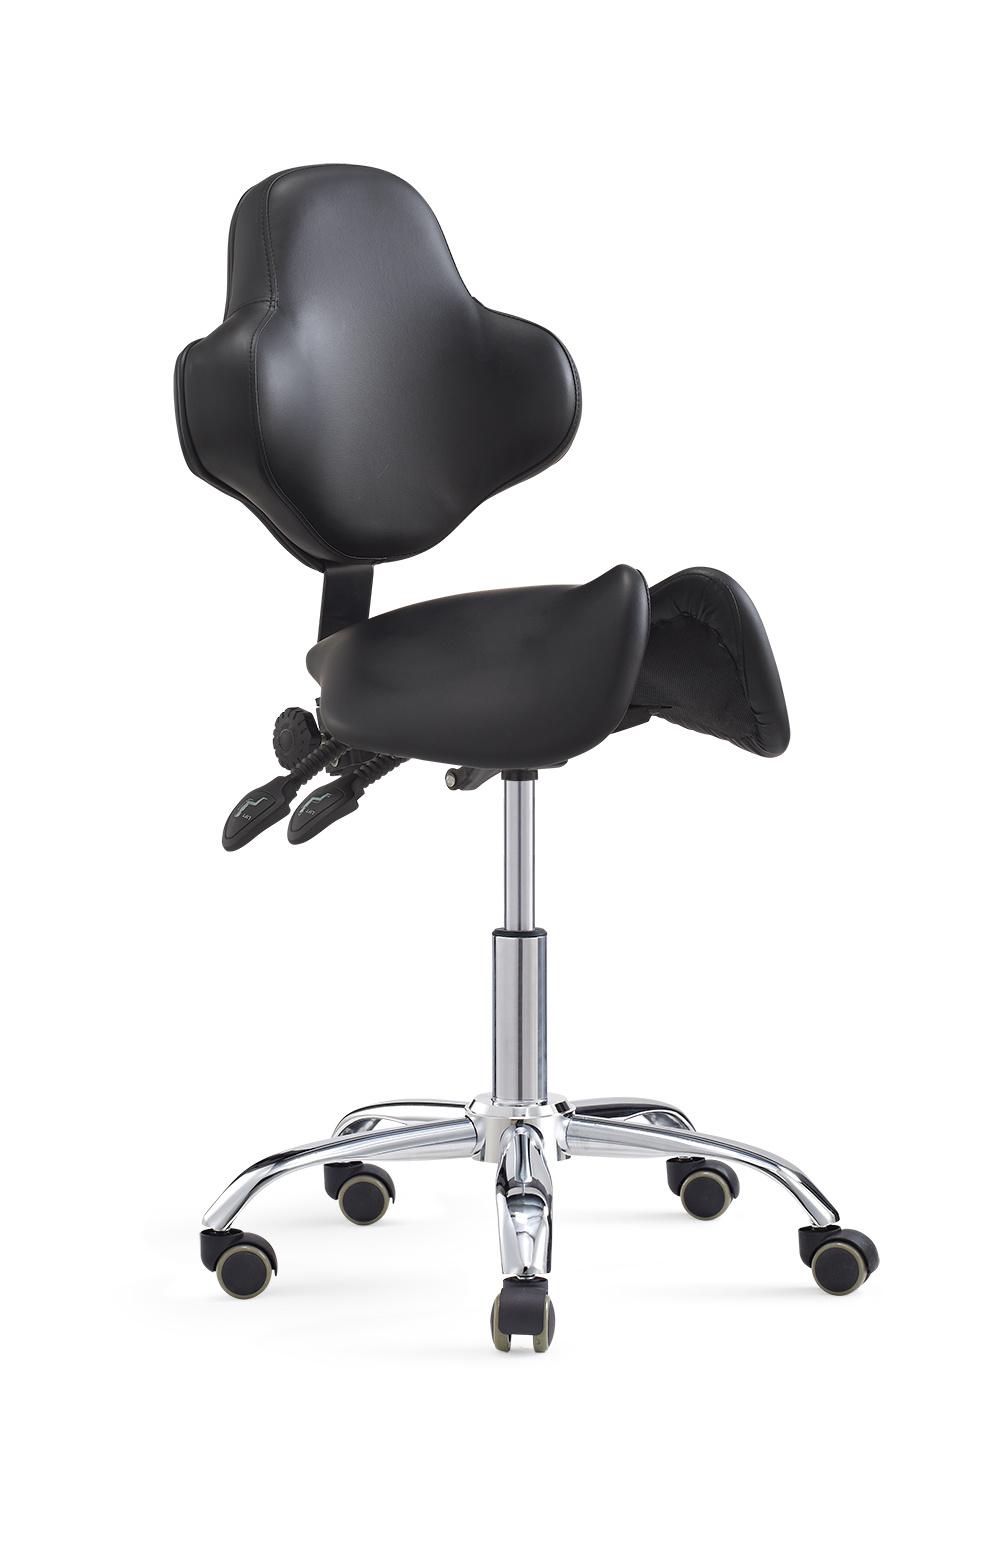 Rolling Saddle Stool with Backrest Height Adjustable Ergonomic Design Office Chair with Wheels for Beauty Salon Medical